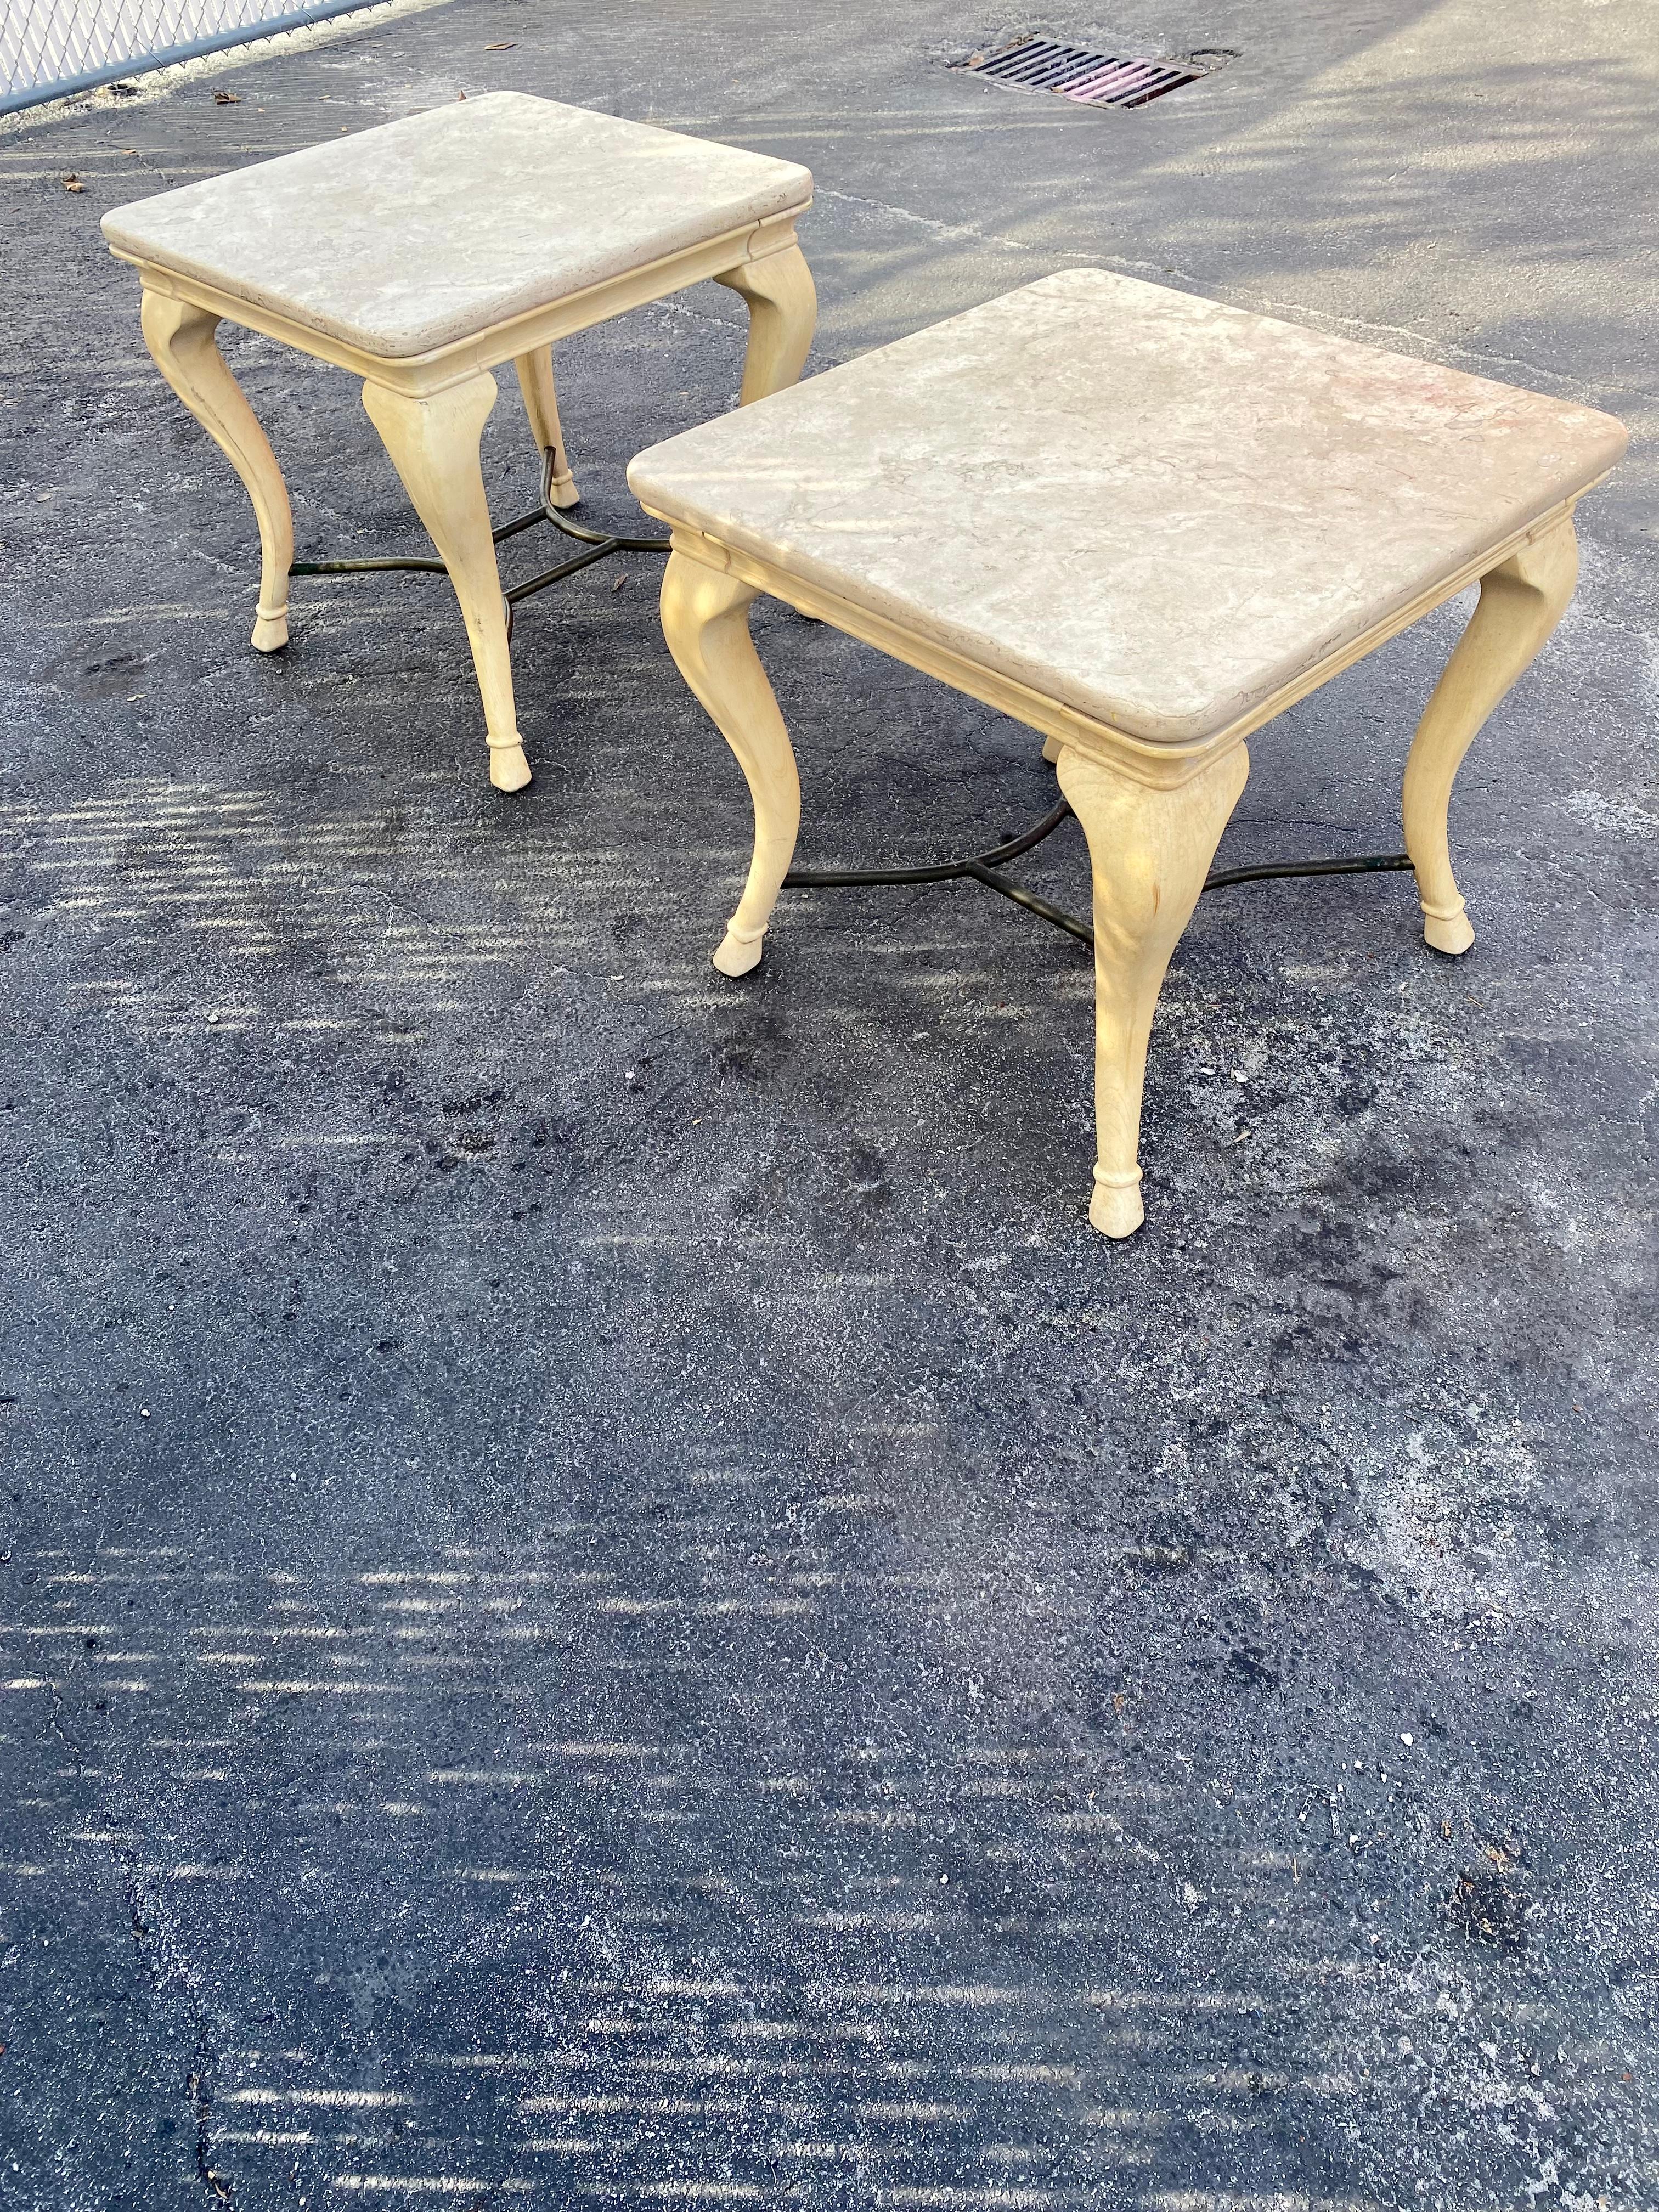 1970s Cabriolet Parchment Wood Travertine Tables, Set of 2 In Good Condition For Sale In Fort Lauderdale, FL